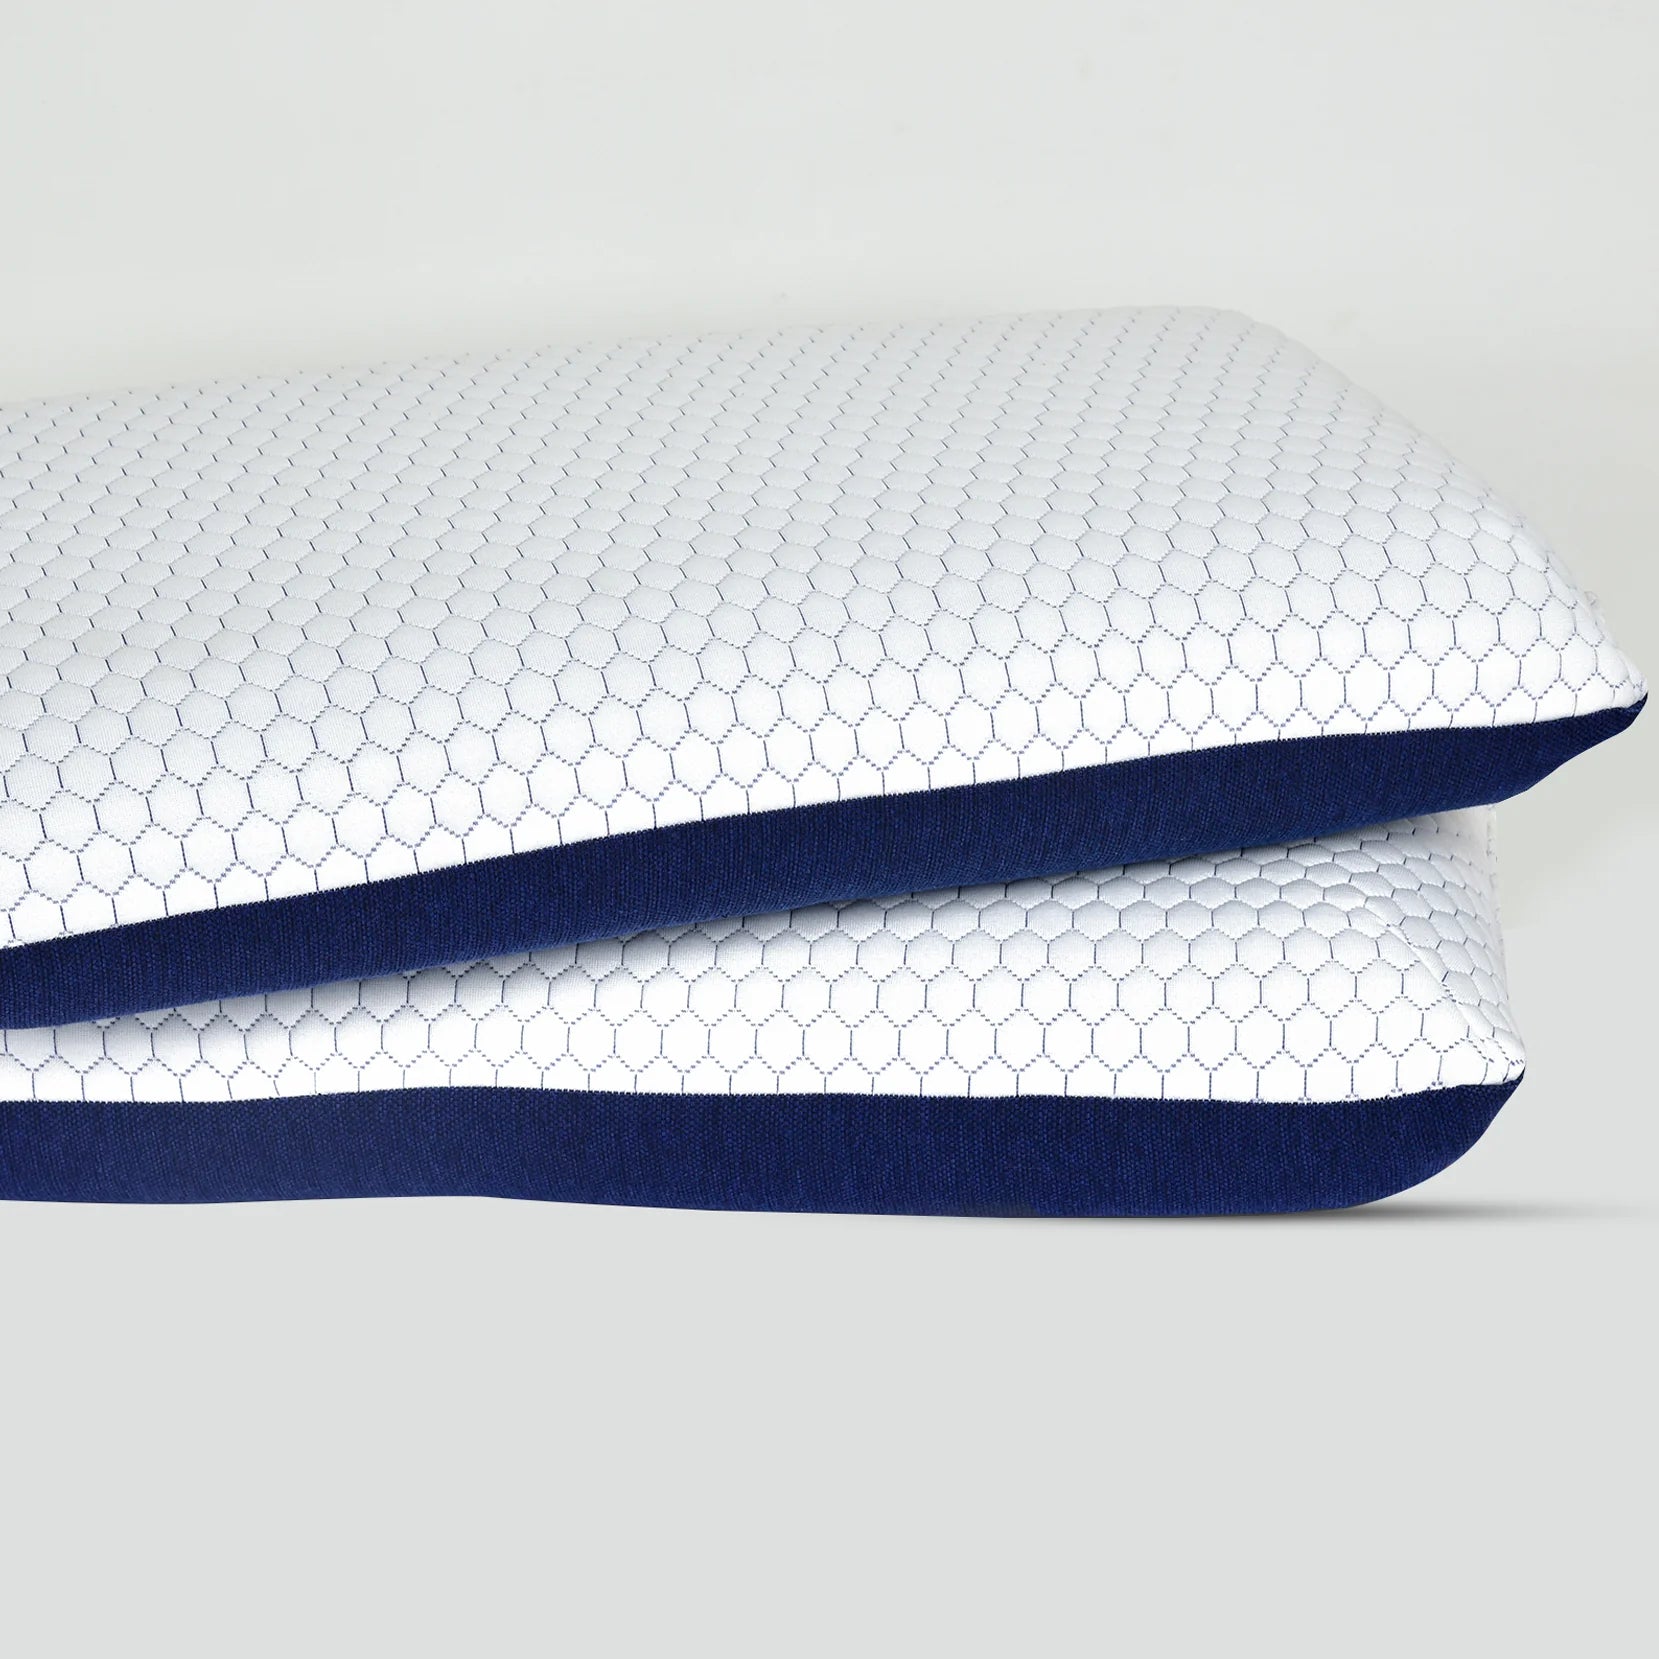 7 Reasons To Invest In A Good Pillow